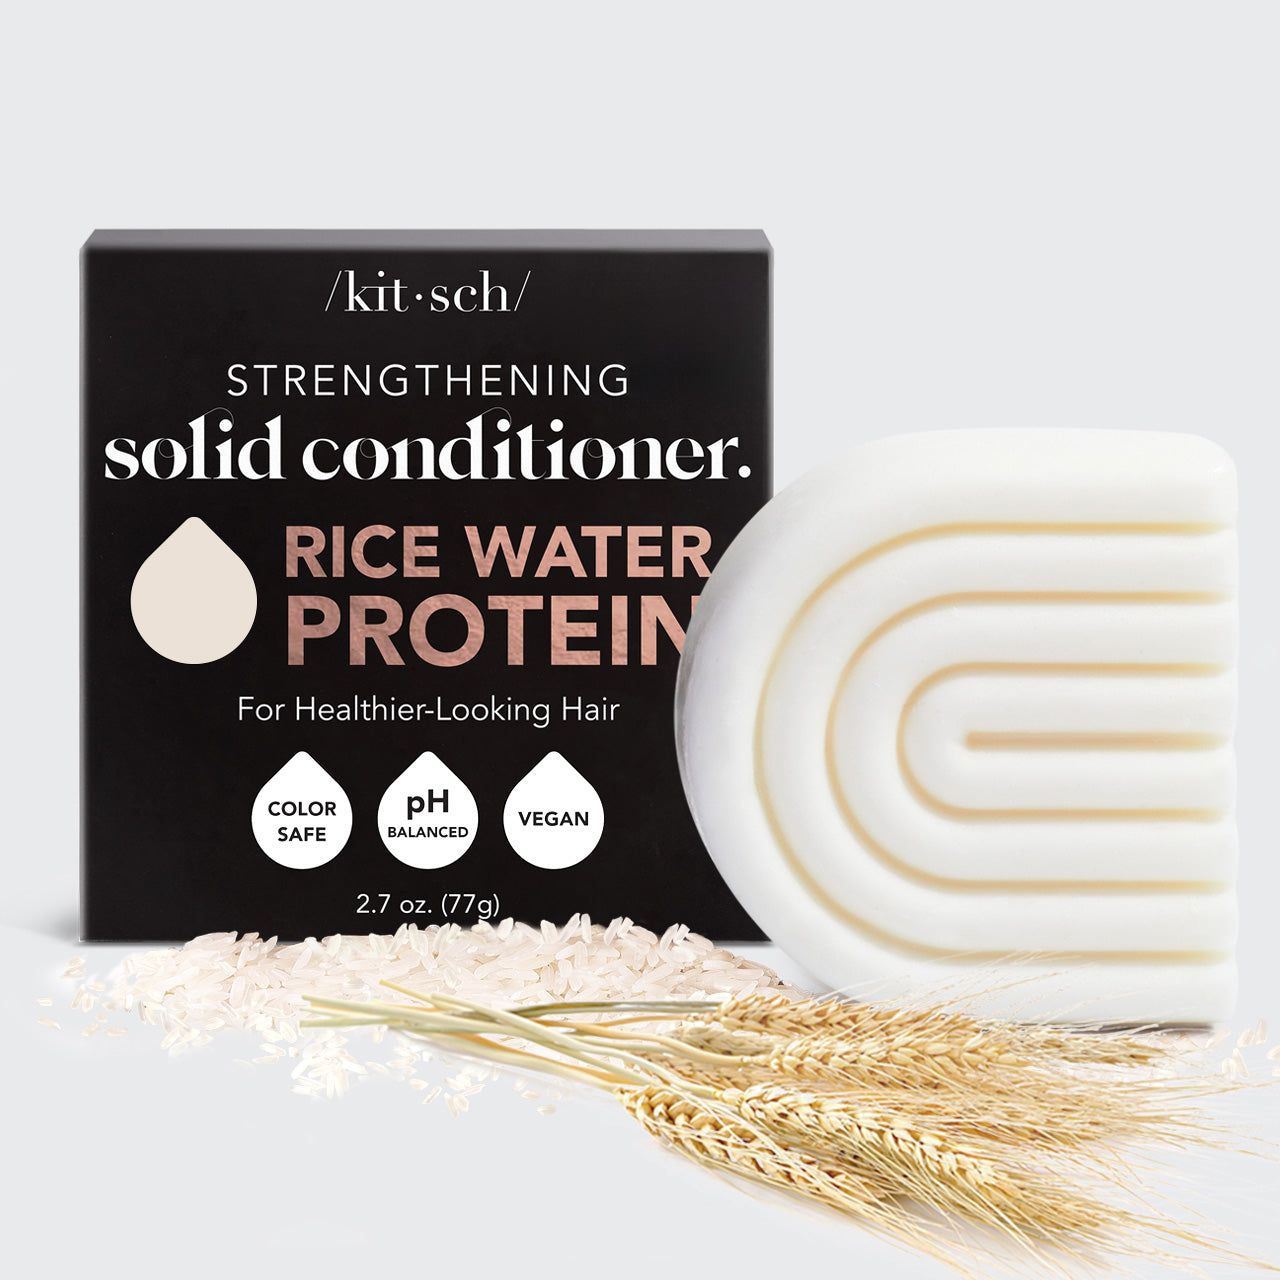 a box of rice water protein